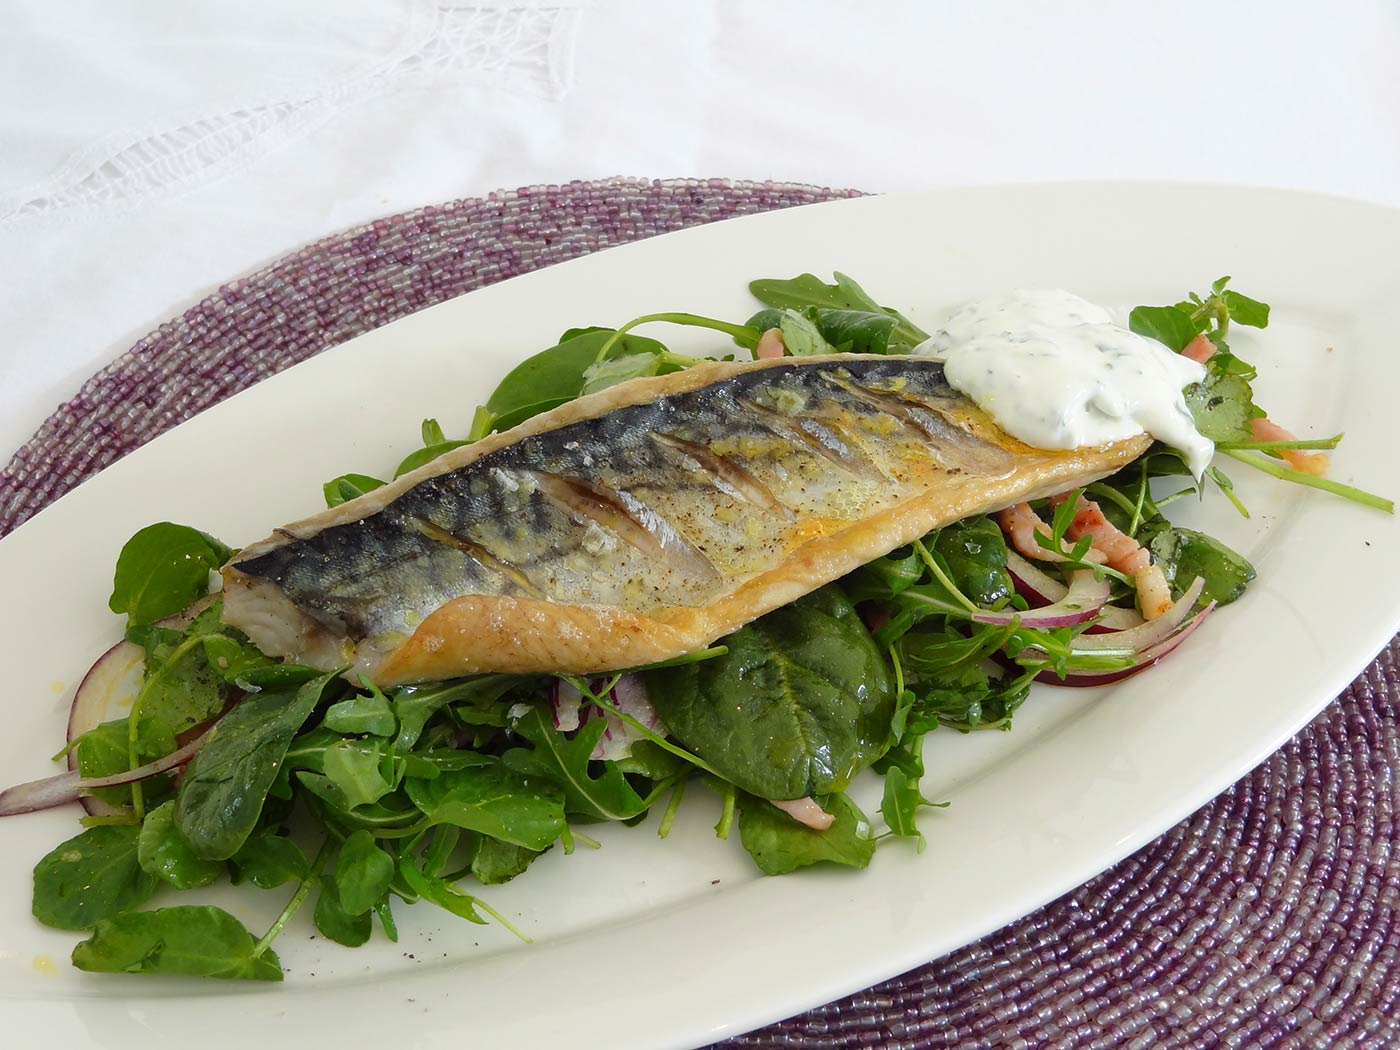 Grilled Mackerel Fillets With Watercress, Smoked Bacon & Herb Crème Fraiche